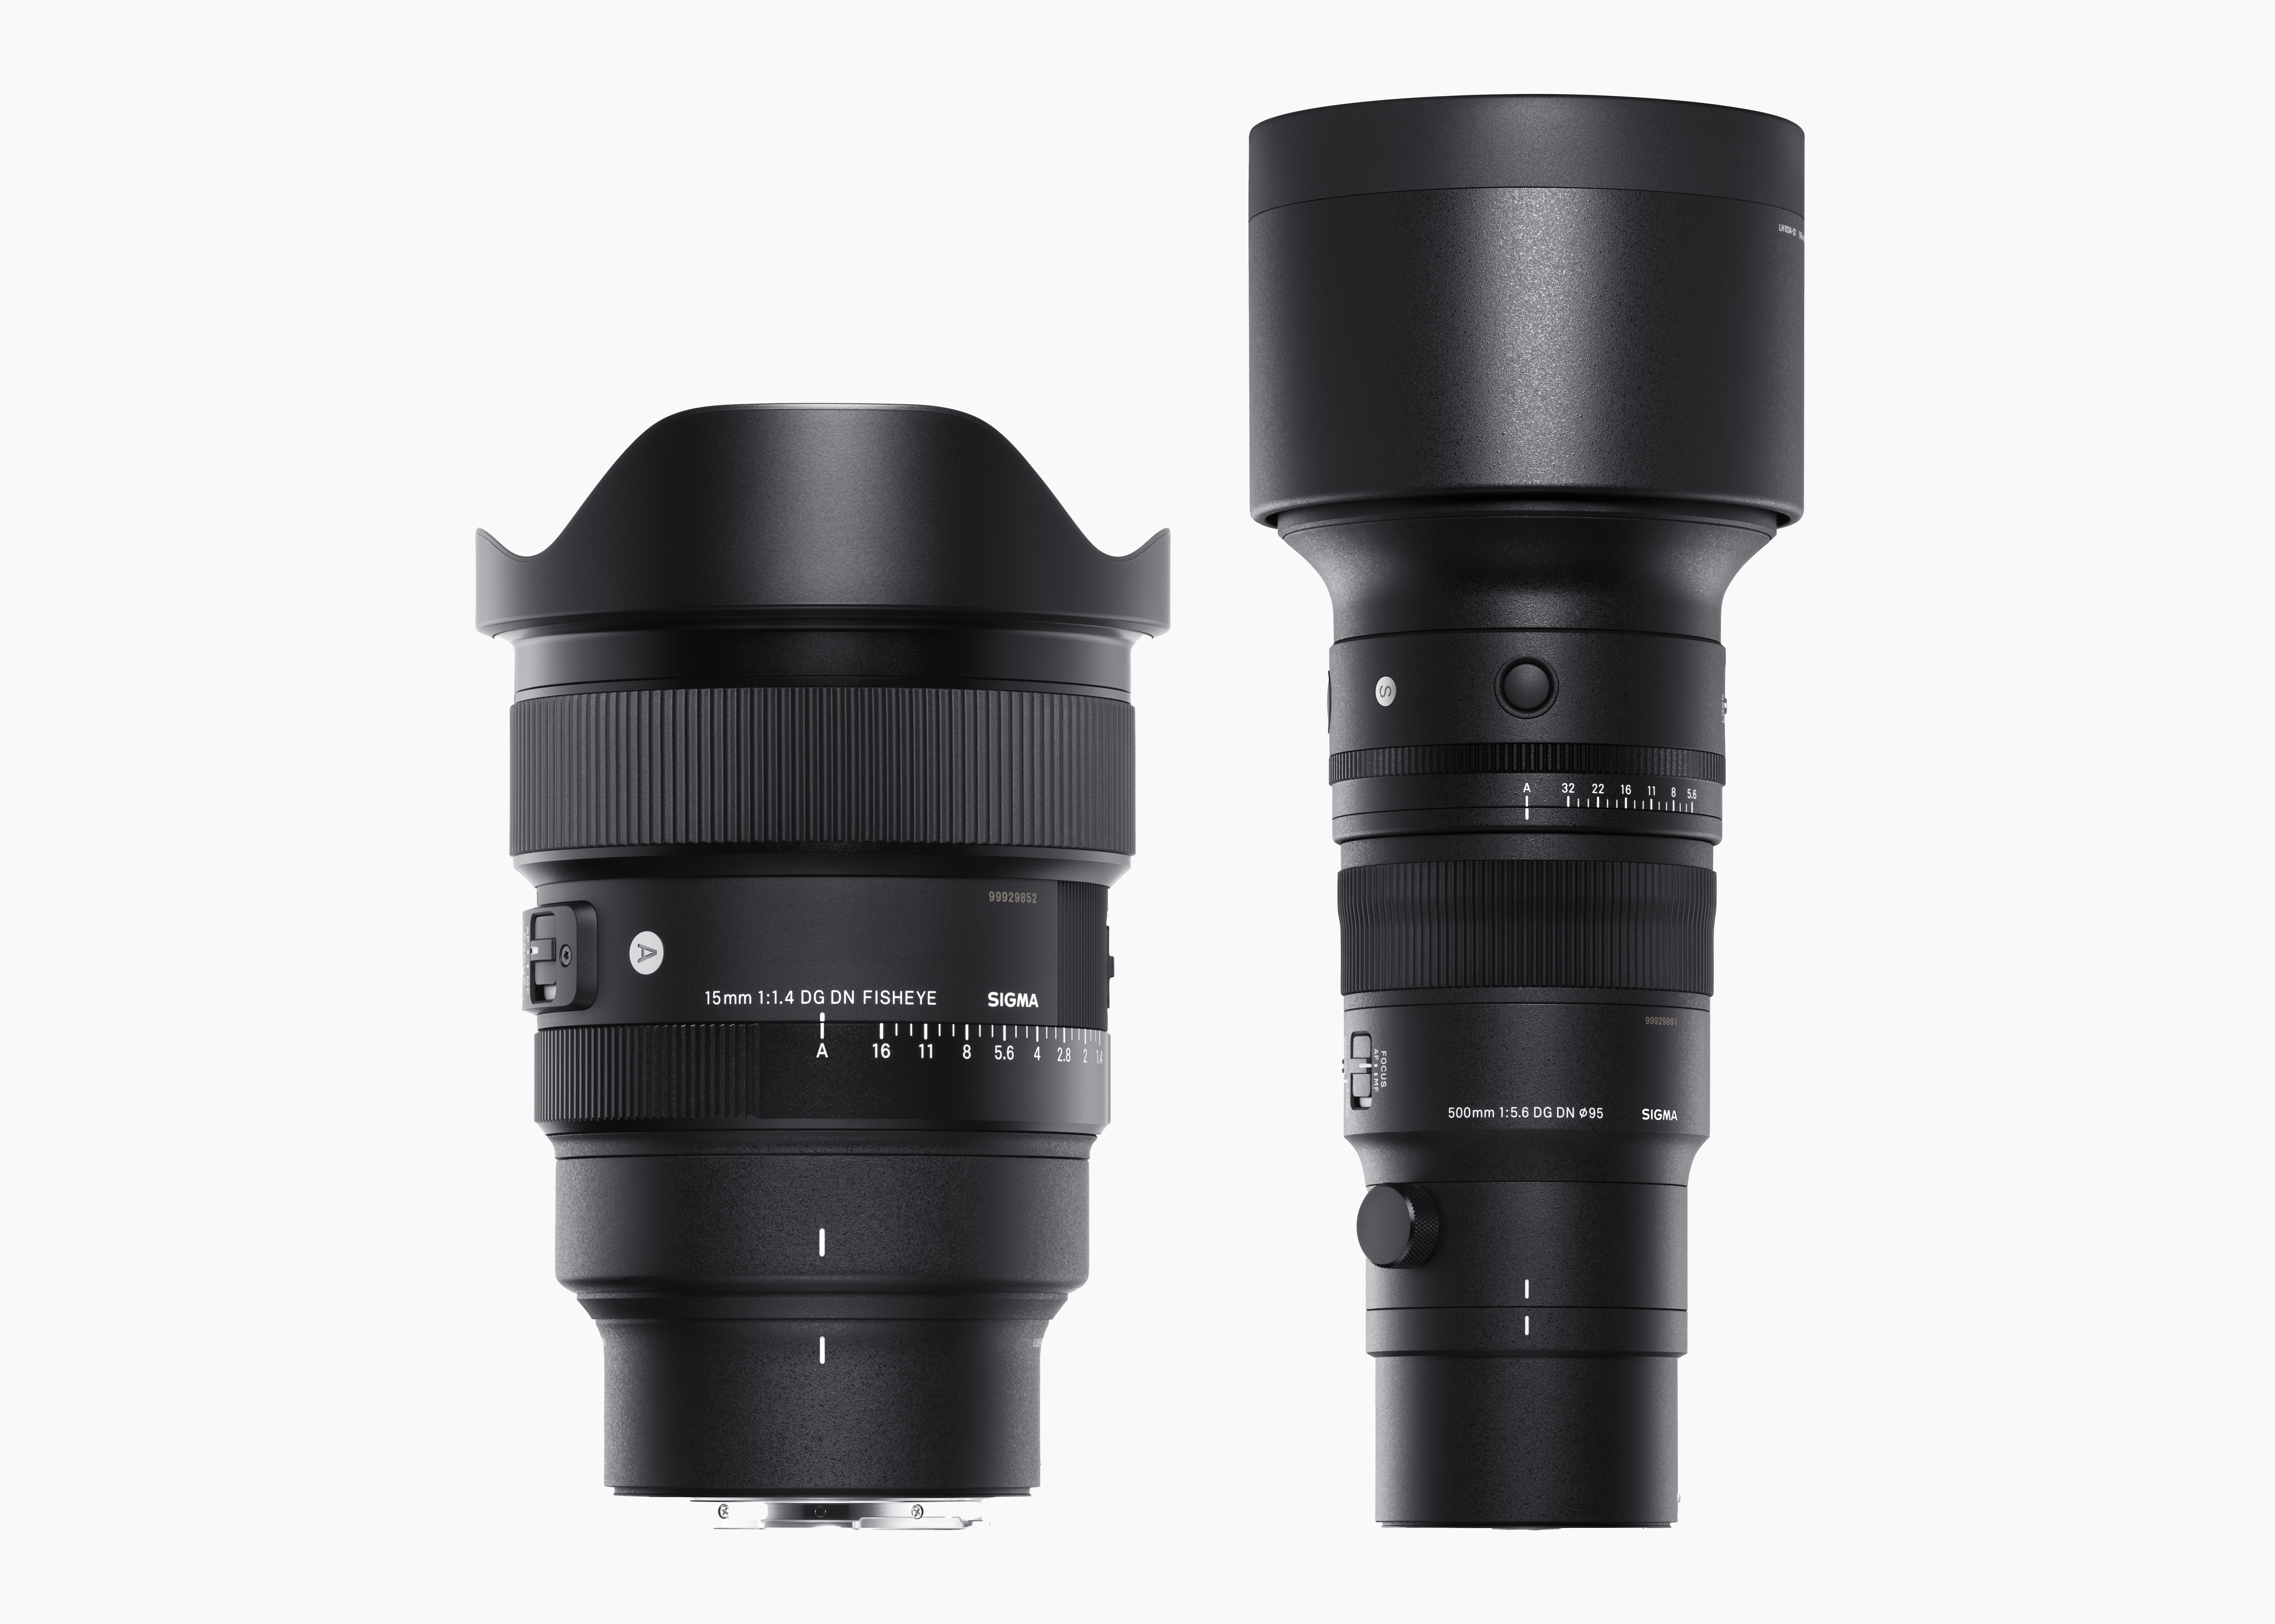 NEW SIGMA 15mm F1.4 DG DN and SIGMA 500mm F5.6 6